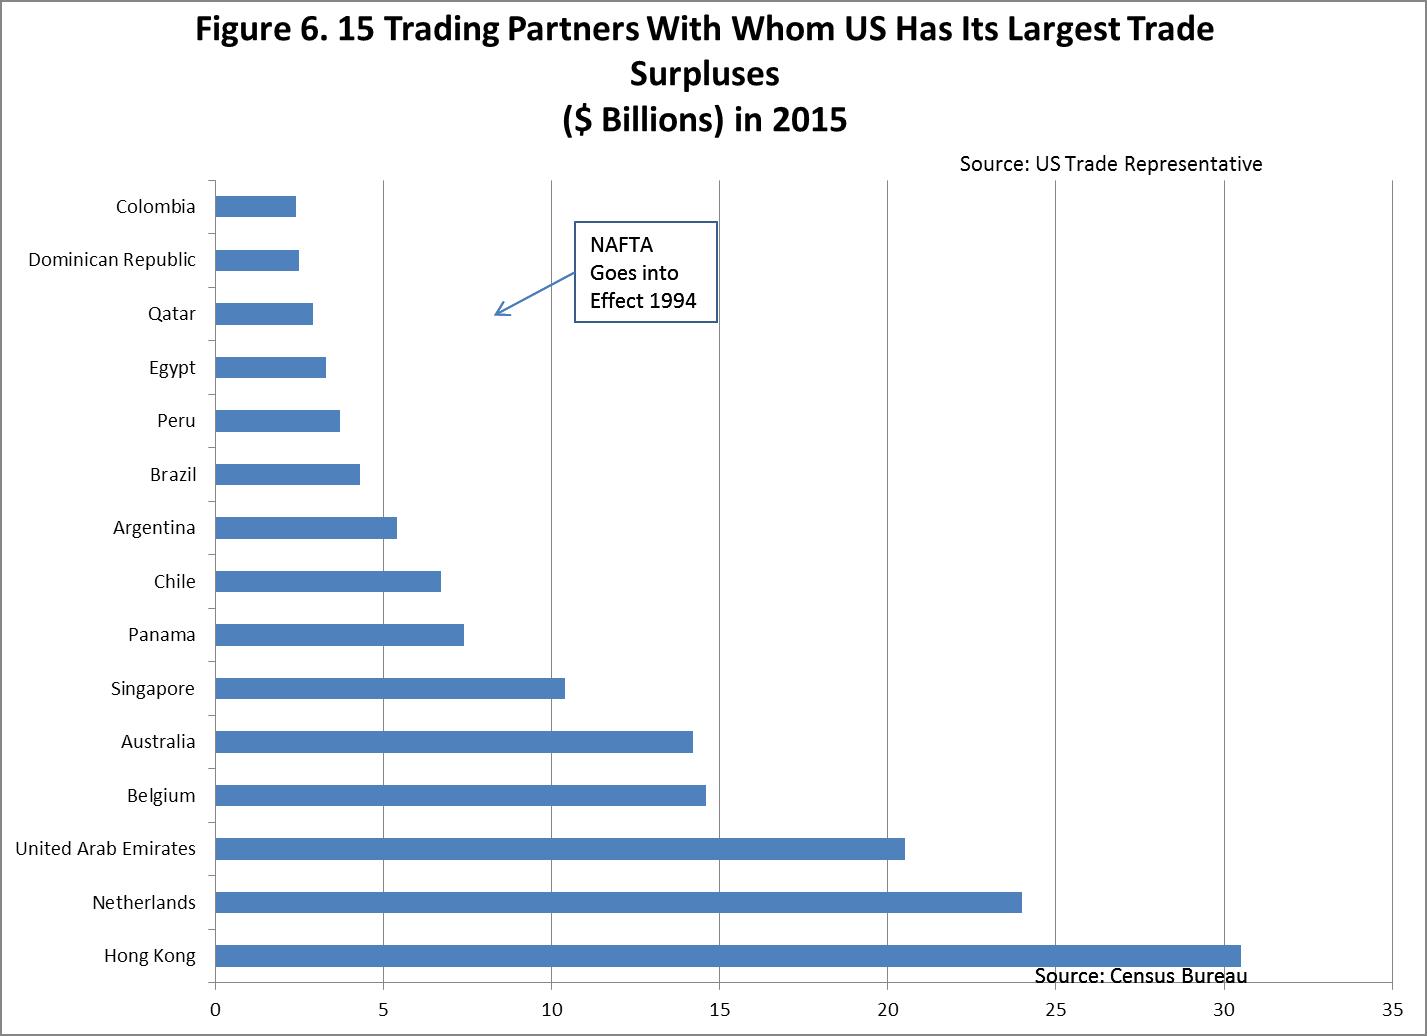 Trading Partners With Whom US Has Its Largest Trade Surpluses